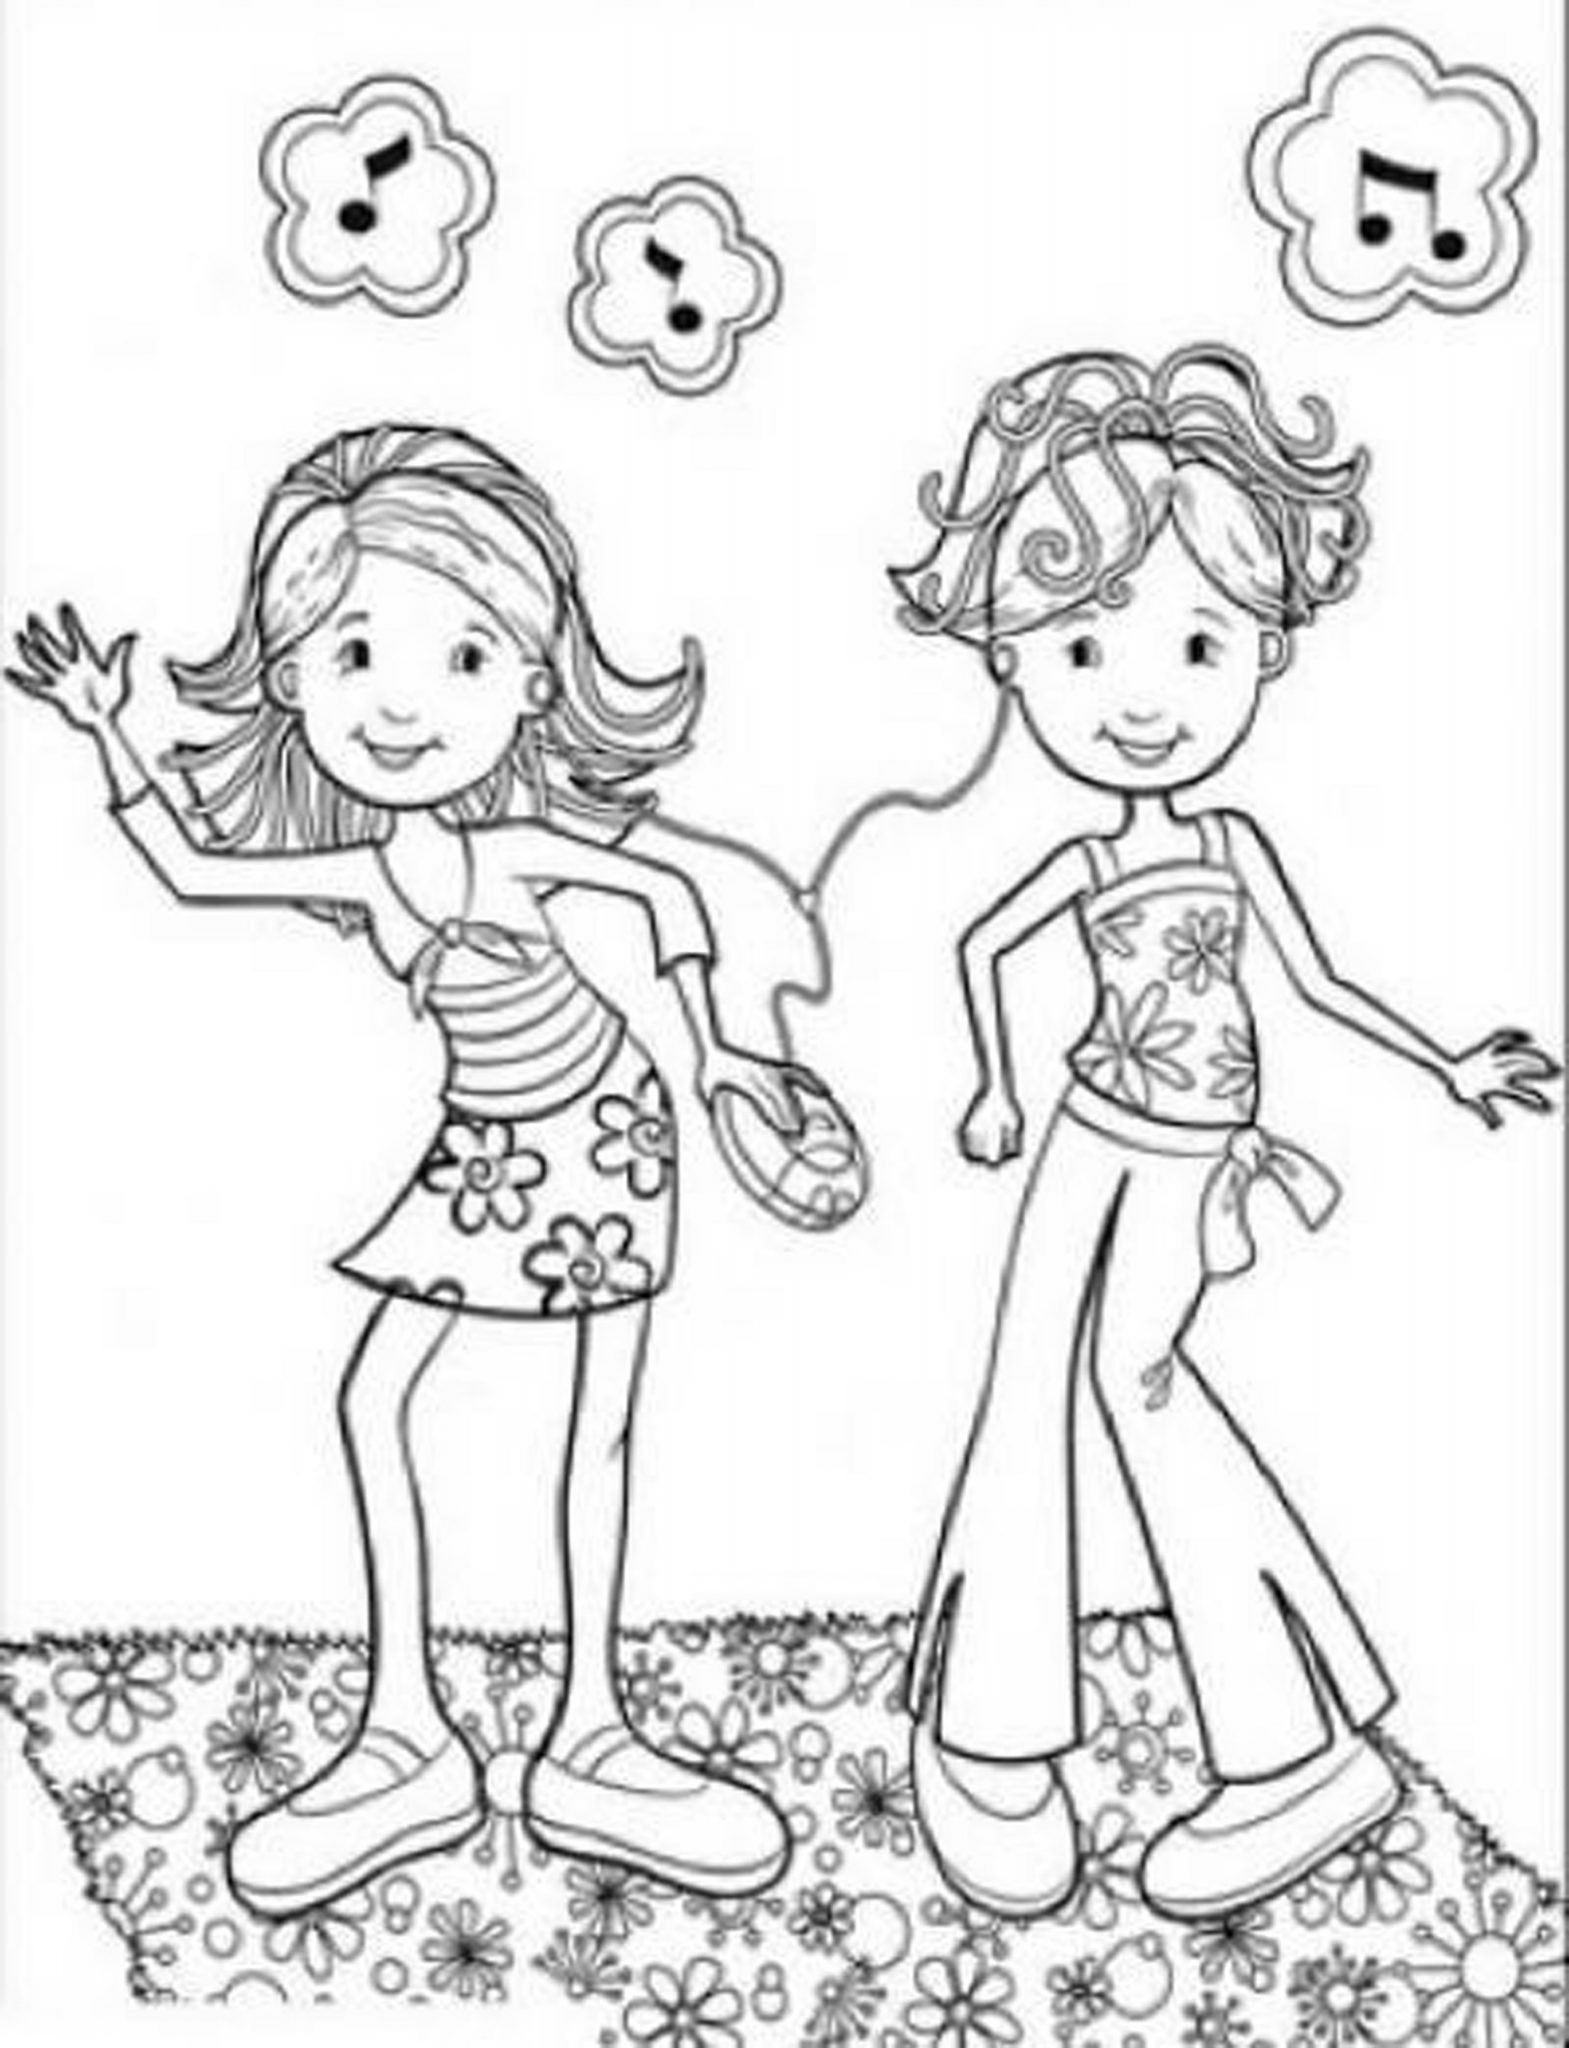 Coloring Pages For Girls Cute
 Print & Download Coloring Pages for Girls Re mend a